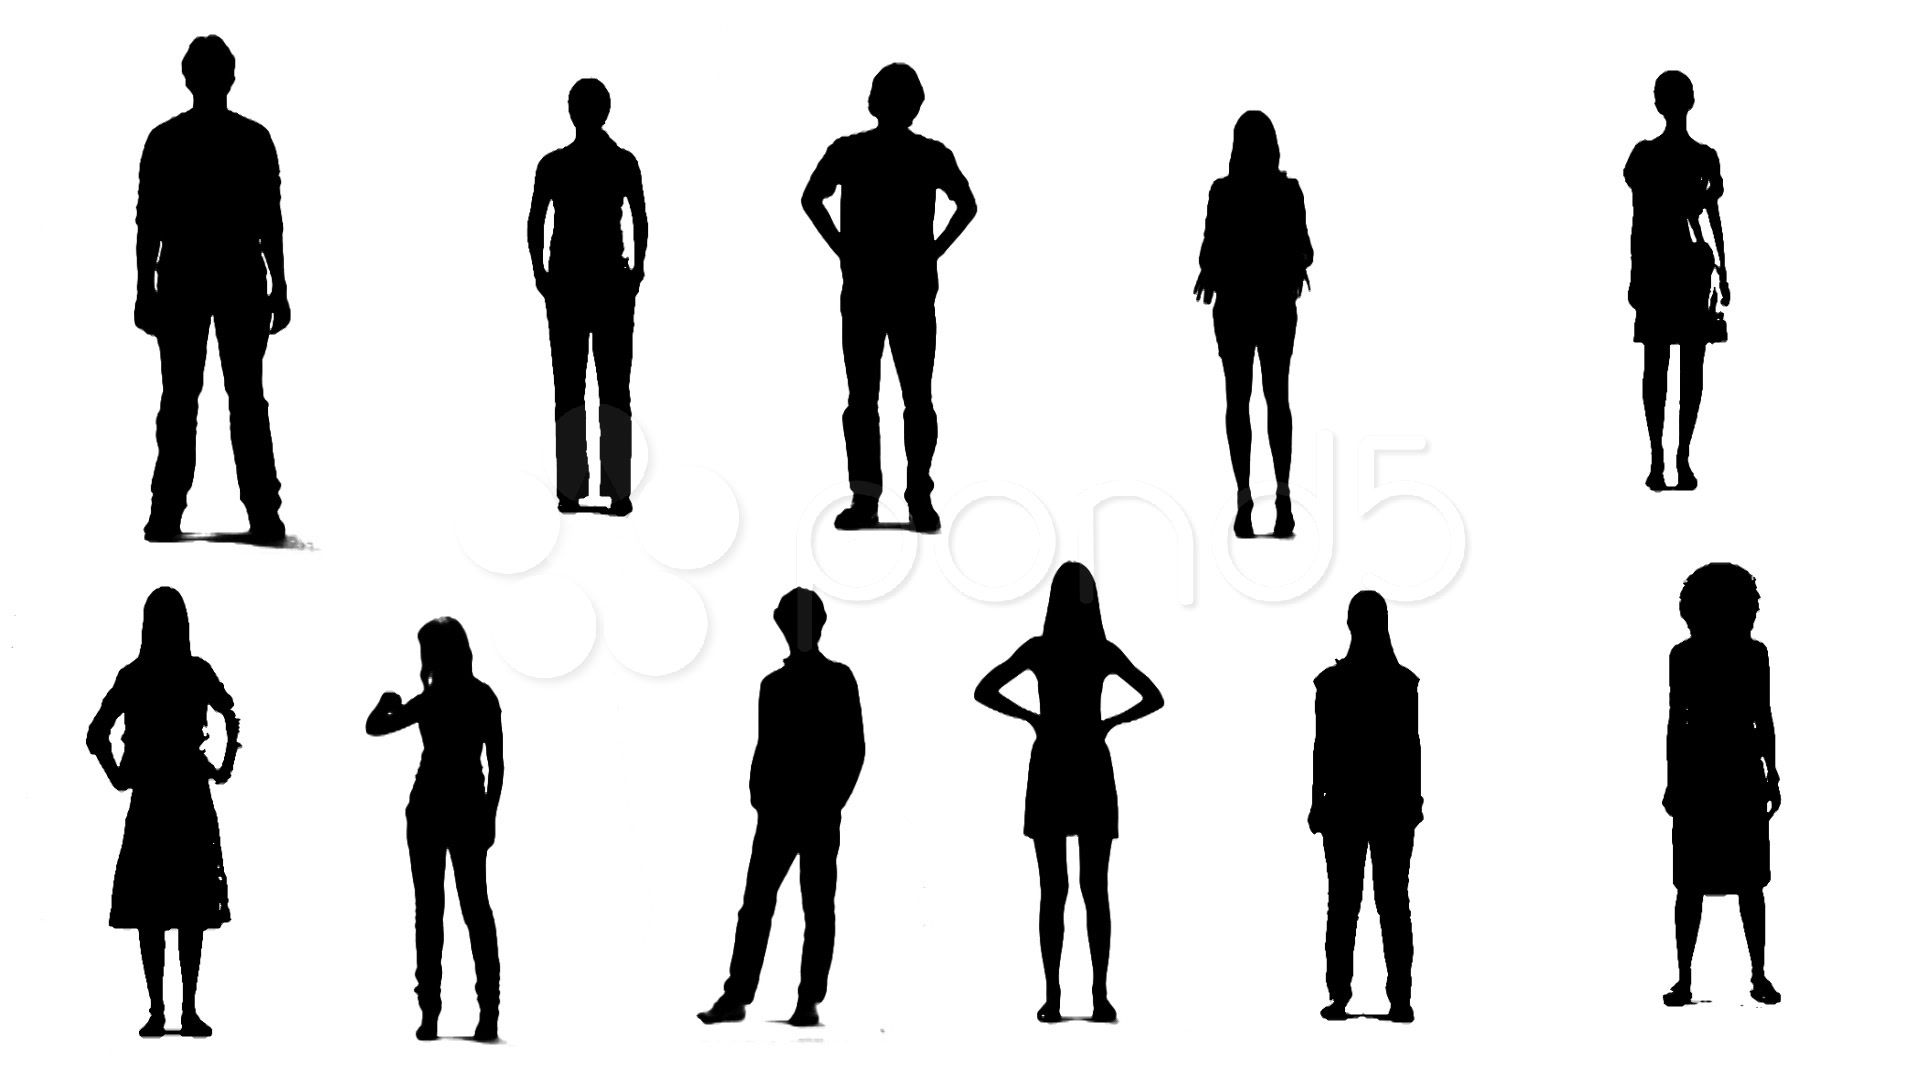 people silhouette - Google Search | TEXTURES | Pinterest | Silhouettes